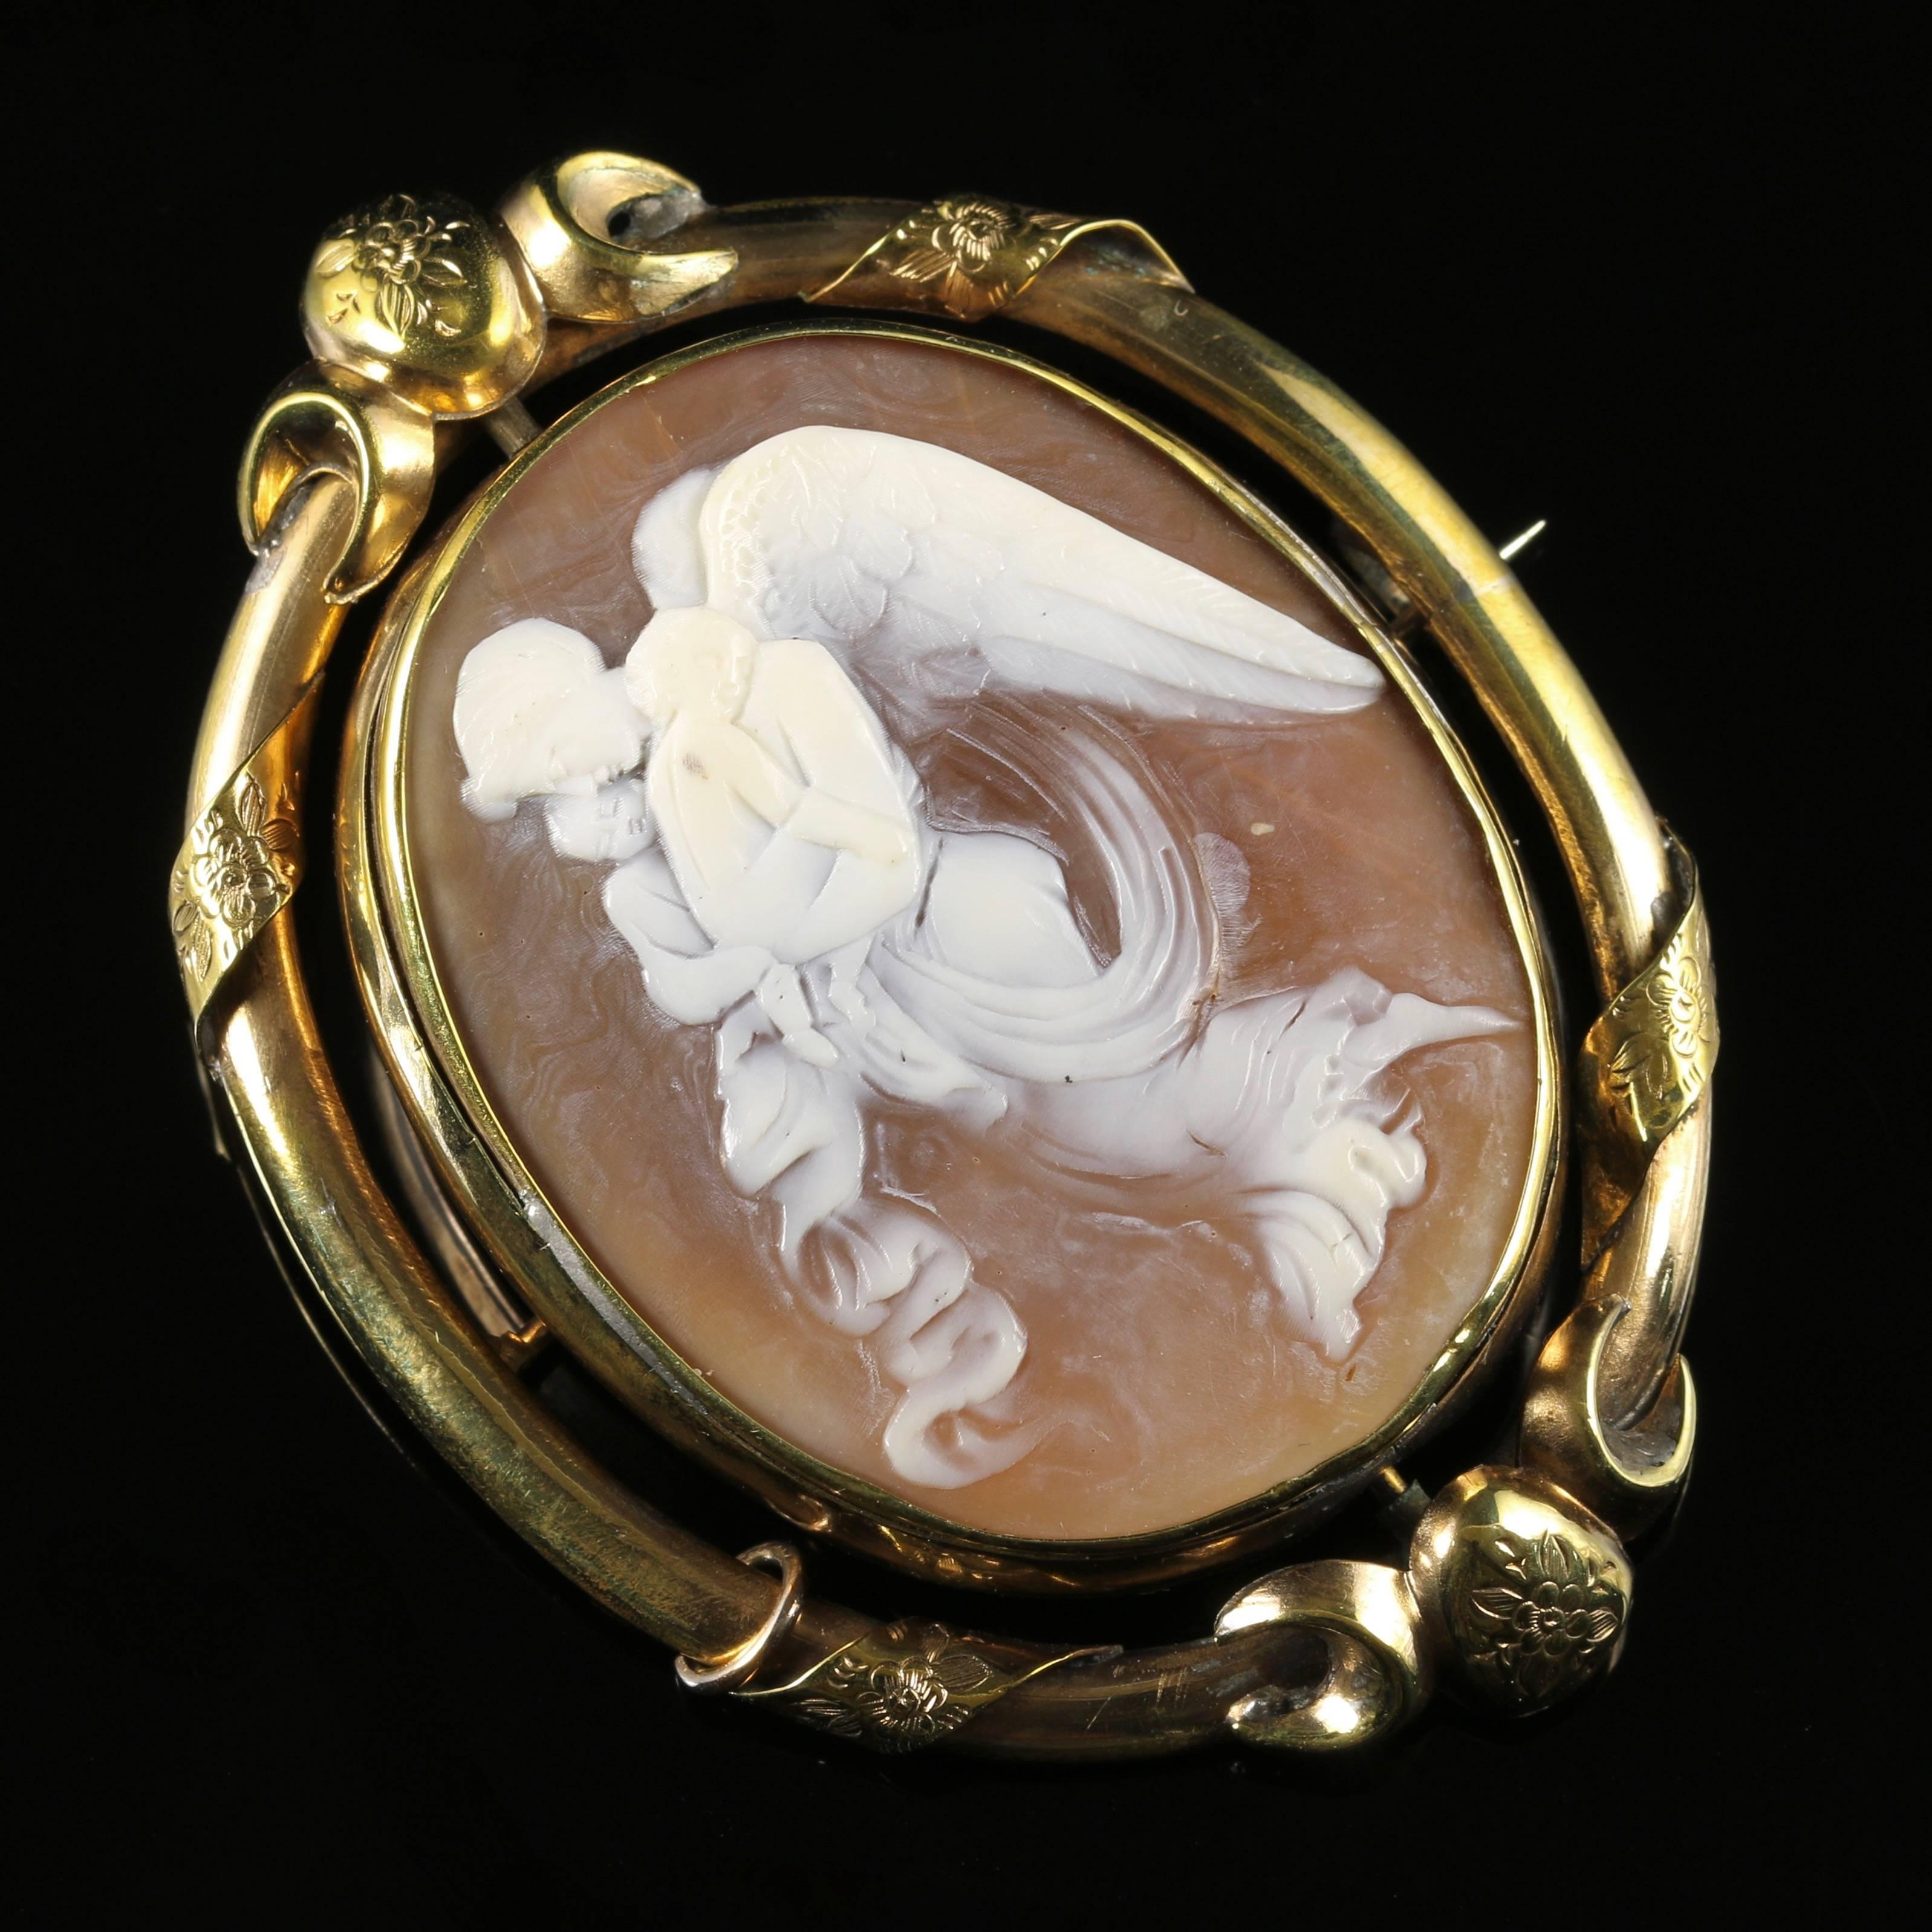 This beautiful Victorian Antique bull mouth shell cameo brooch is a swivel mount, set in a lovely ornate frame.

Purchased in London and steeped in English history.

The lovely brooch has a central swivel so the brooch can be worn both ways.

The